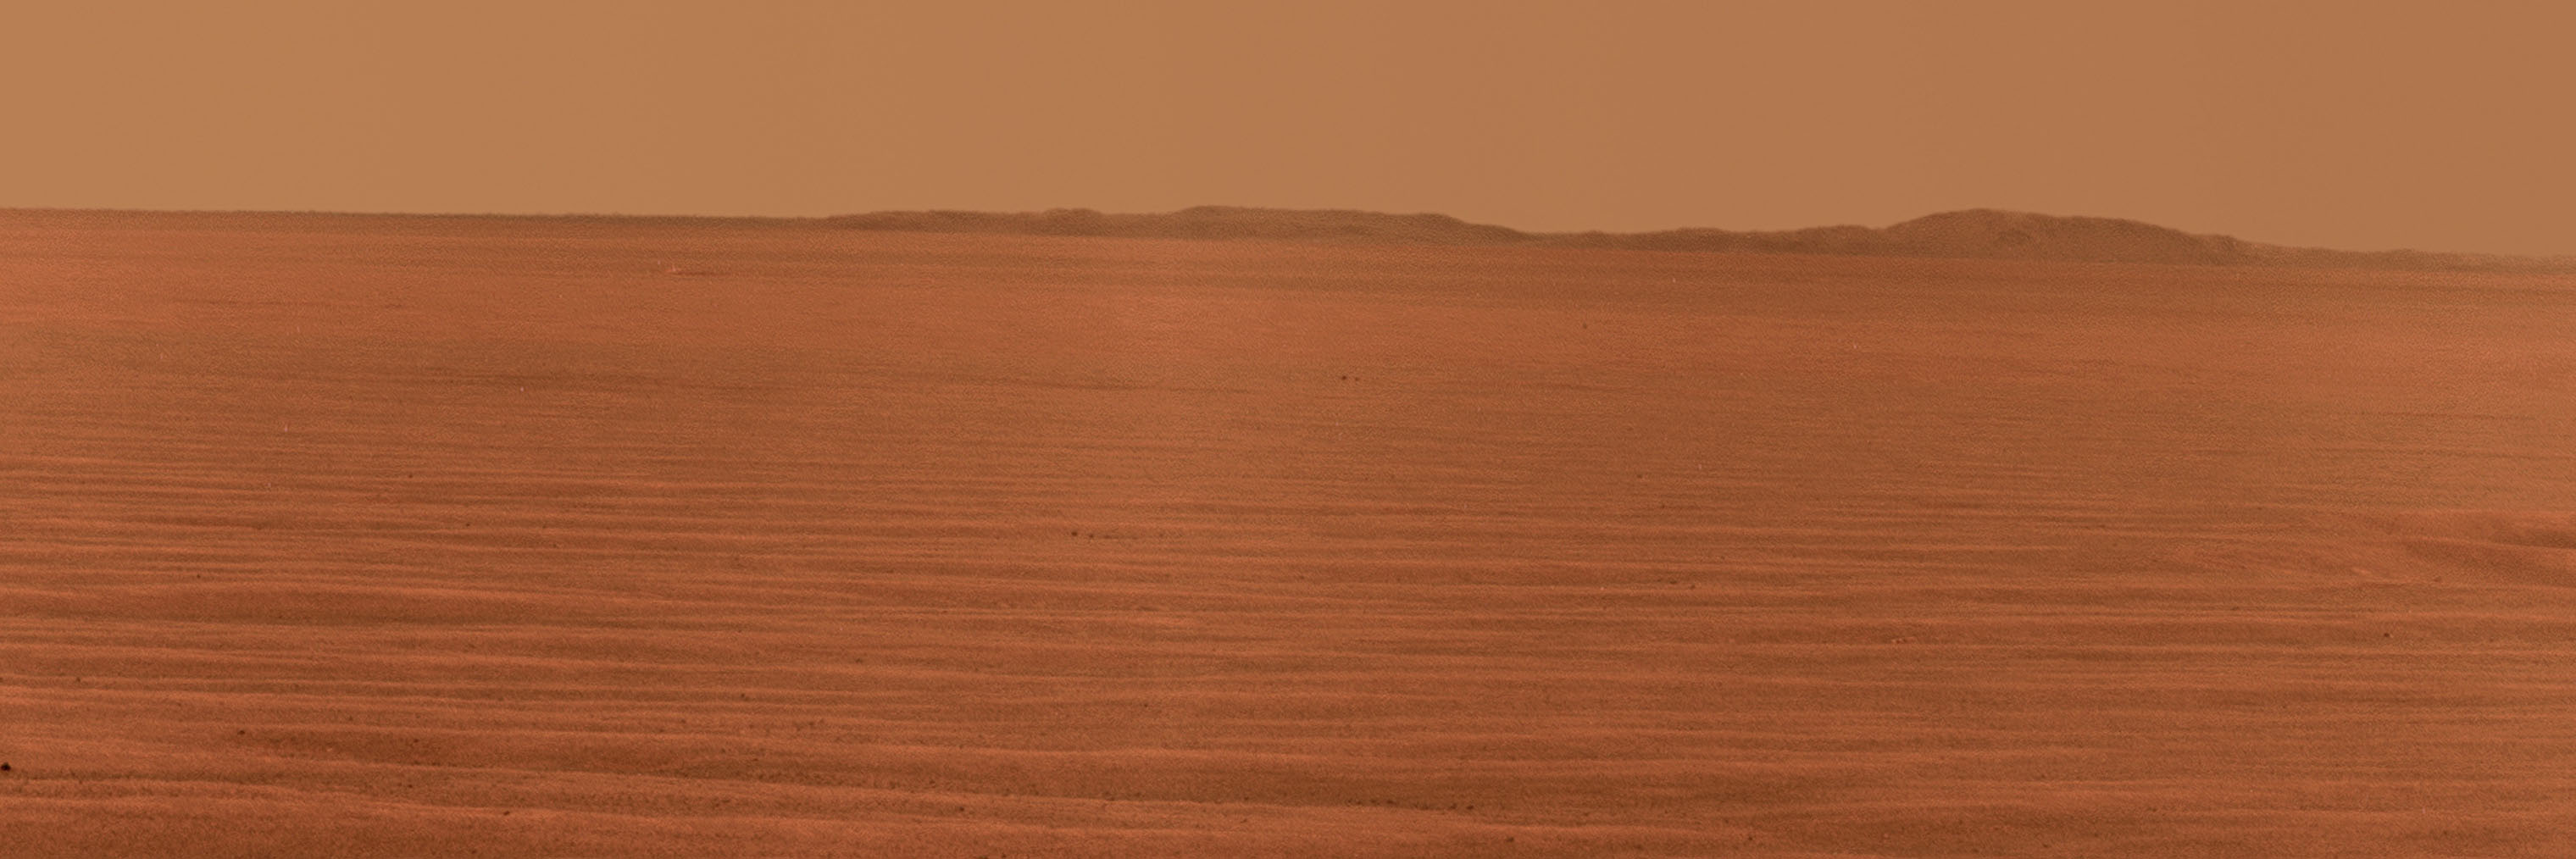 Opportunity used its panoramic camera to record this eastward horizon view on Oct. 31, 2010, its 2,407th Martian day, or sol, of the rover's work on Mars. (UIG via Getty Images)